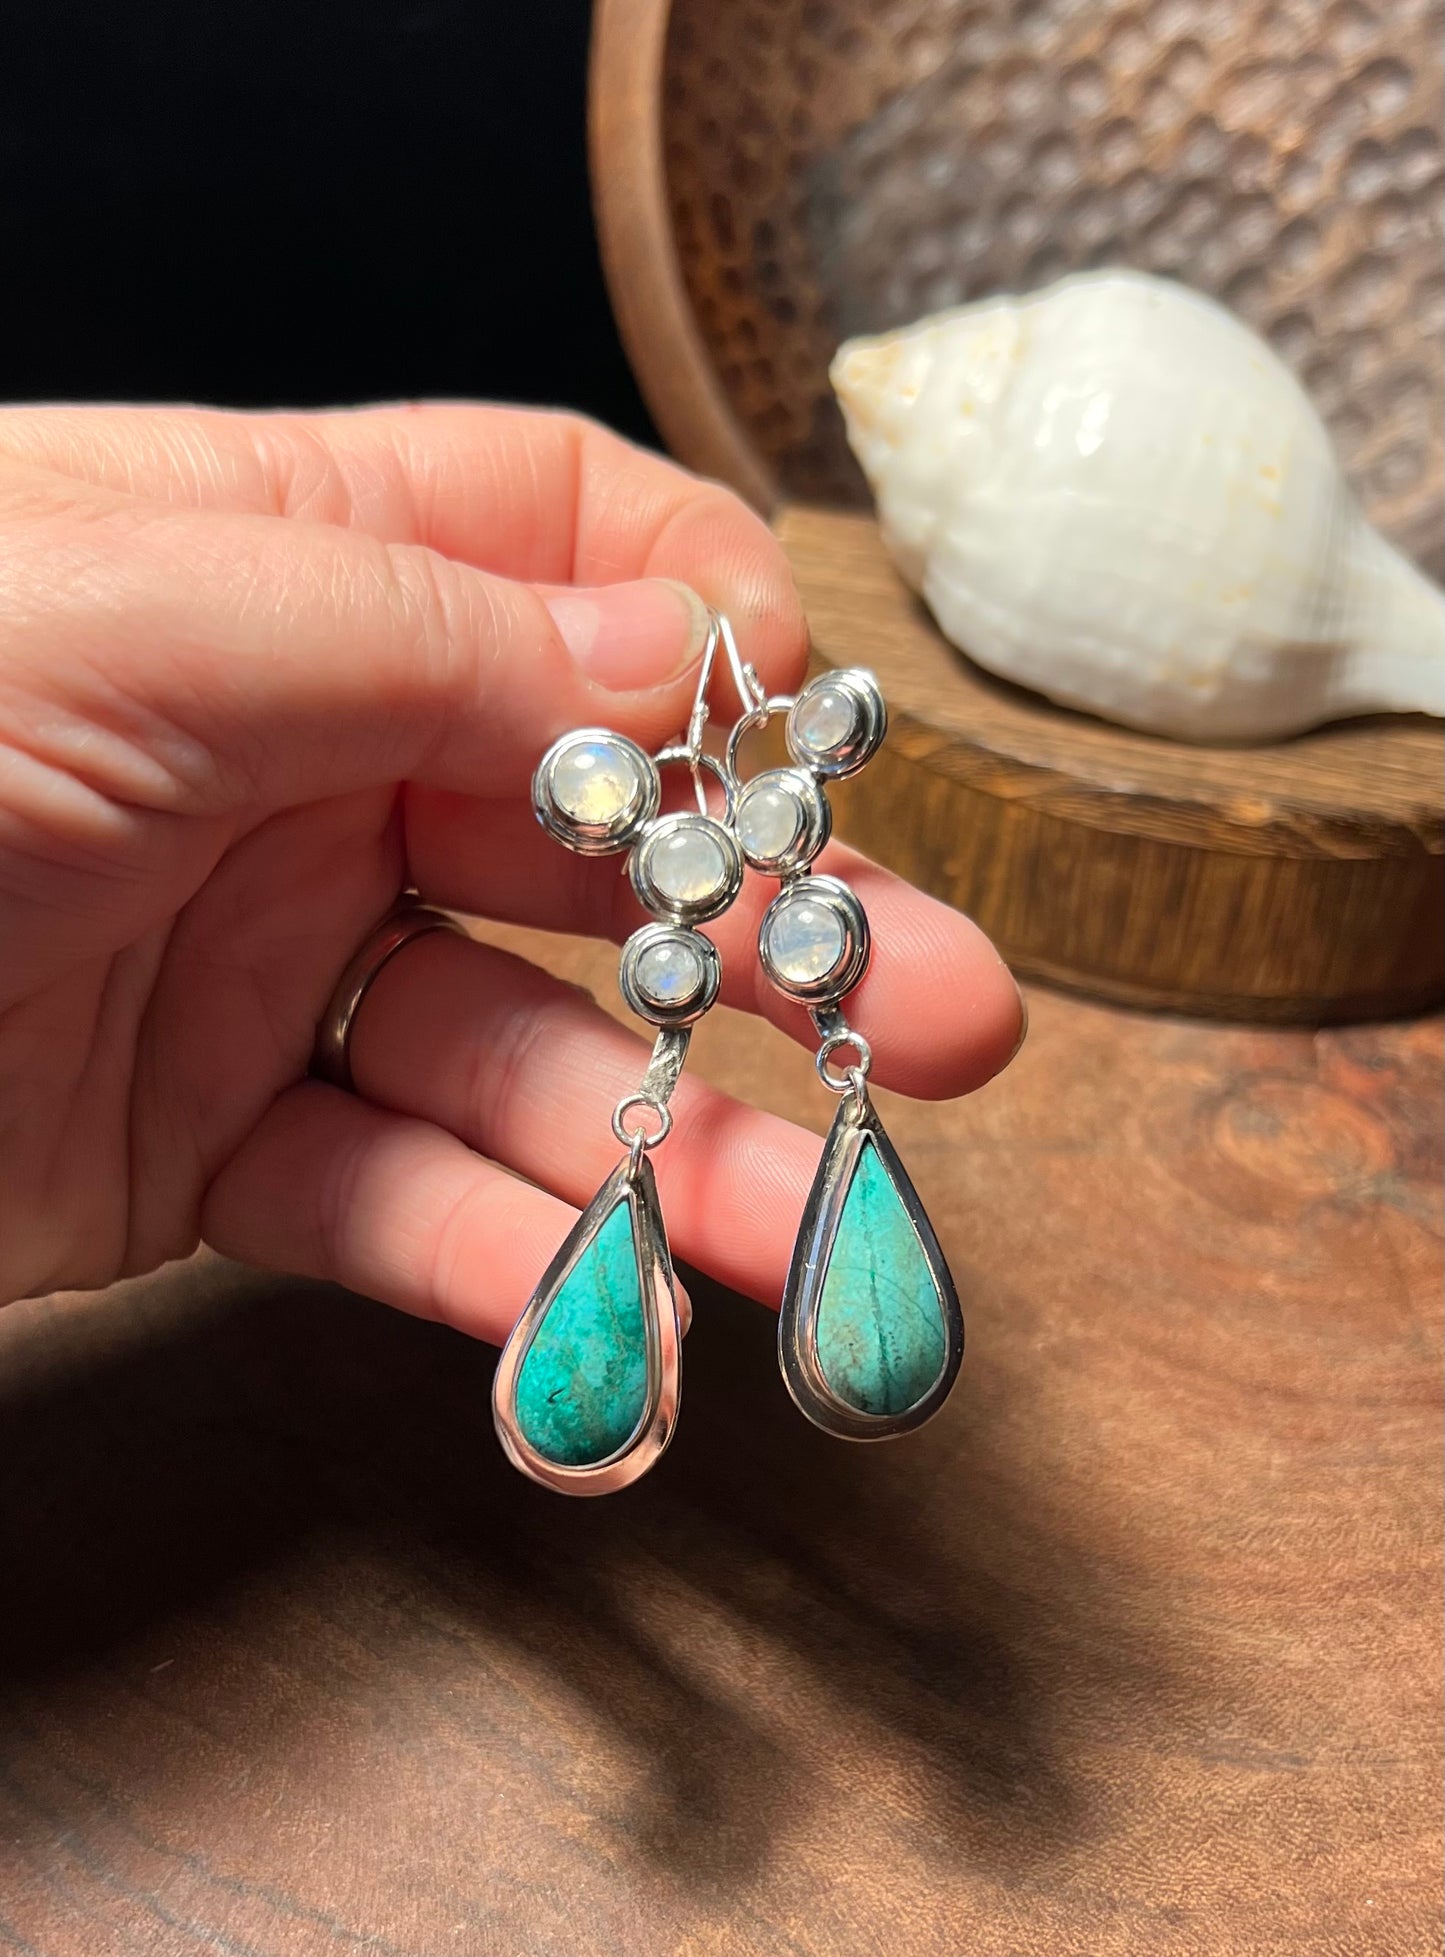 Chrysocolla in Quartz with Rainbow Moonstones Sterling Silver Earrings